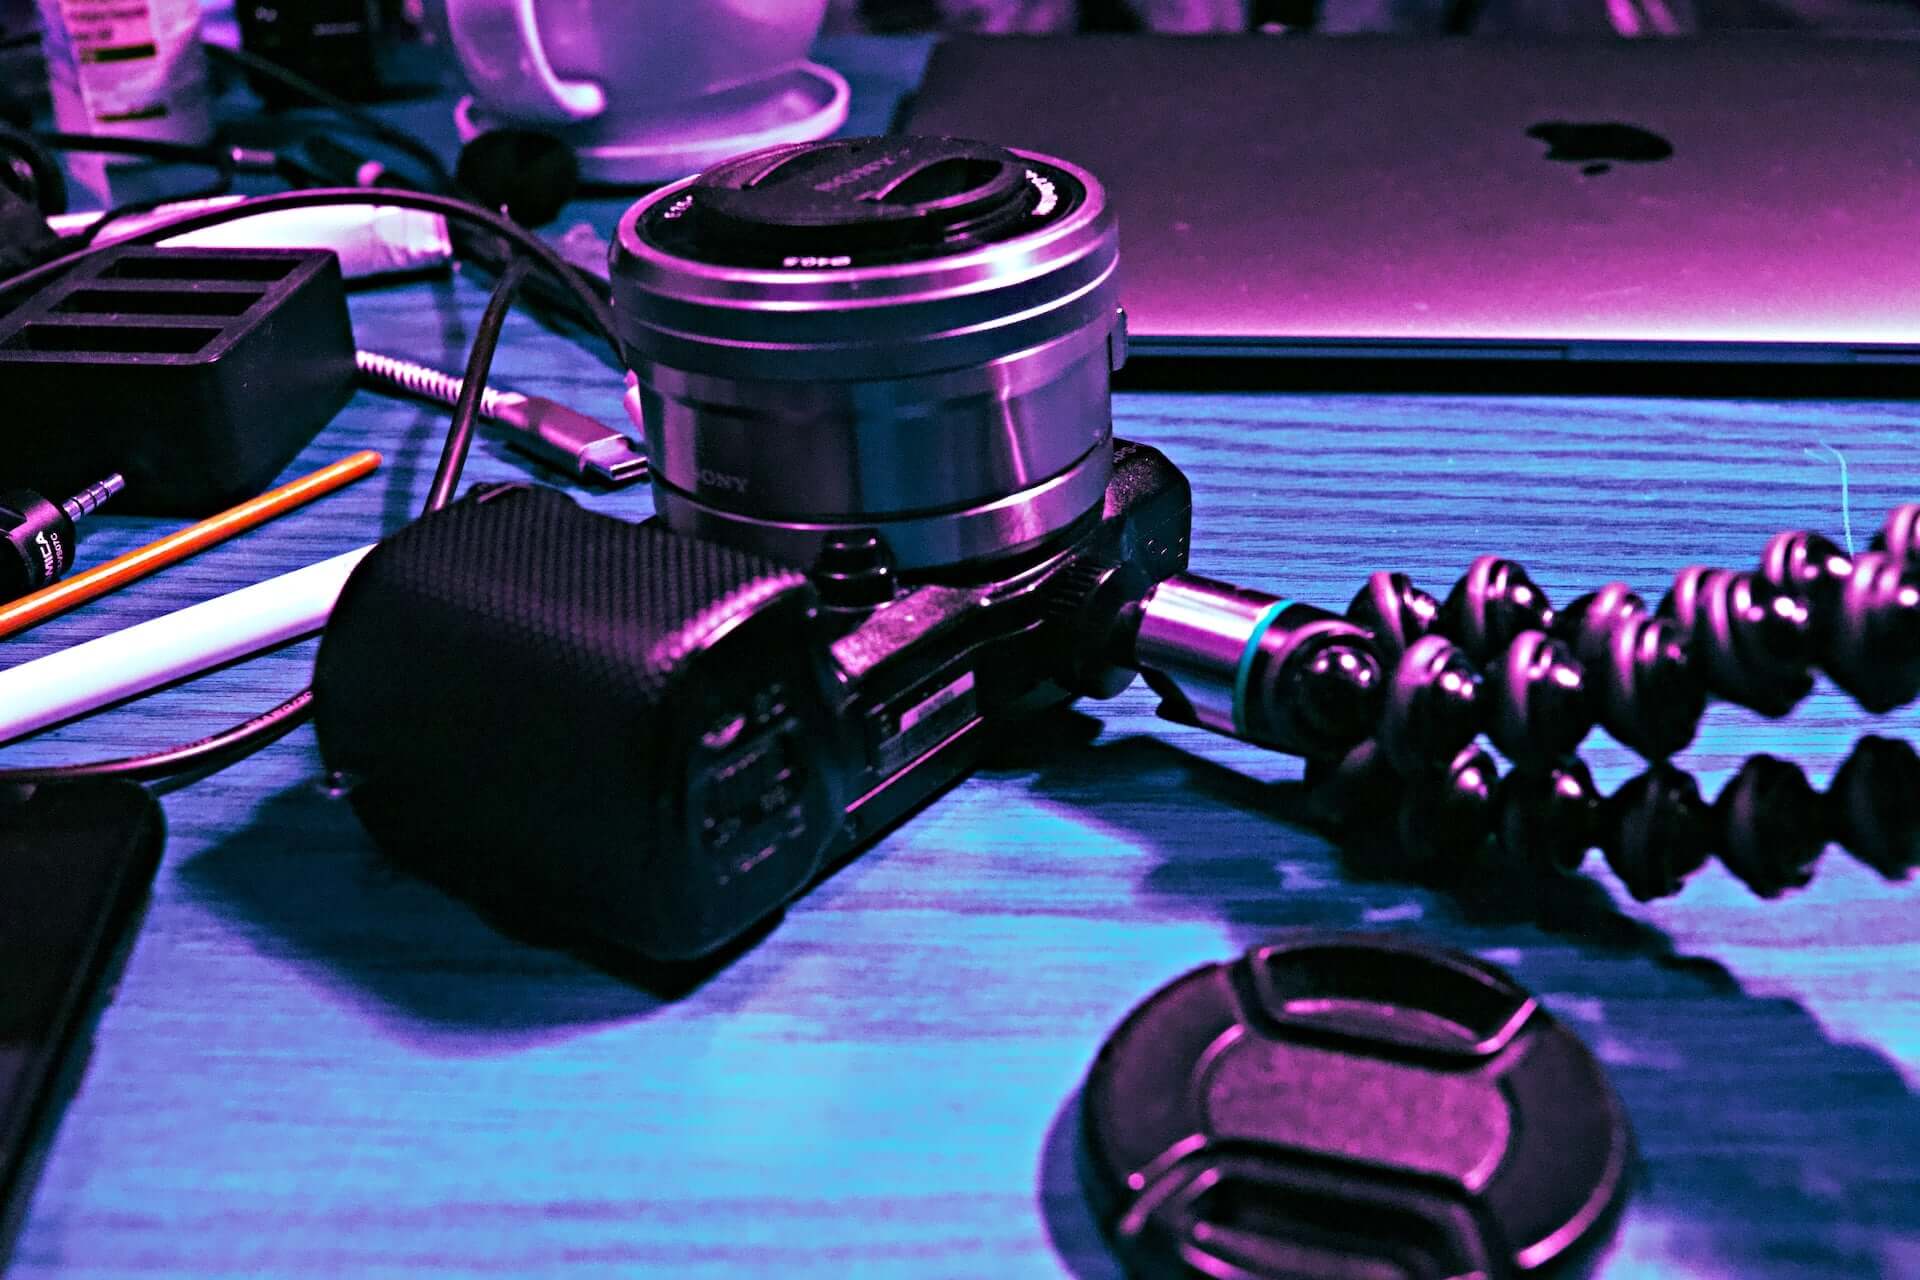 A camera on an adjustable tripod in pink and blue lighting.